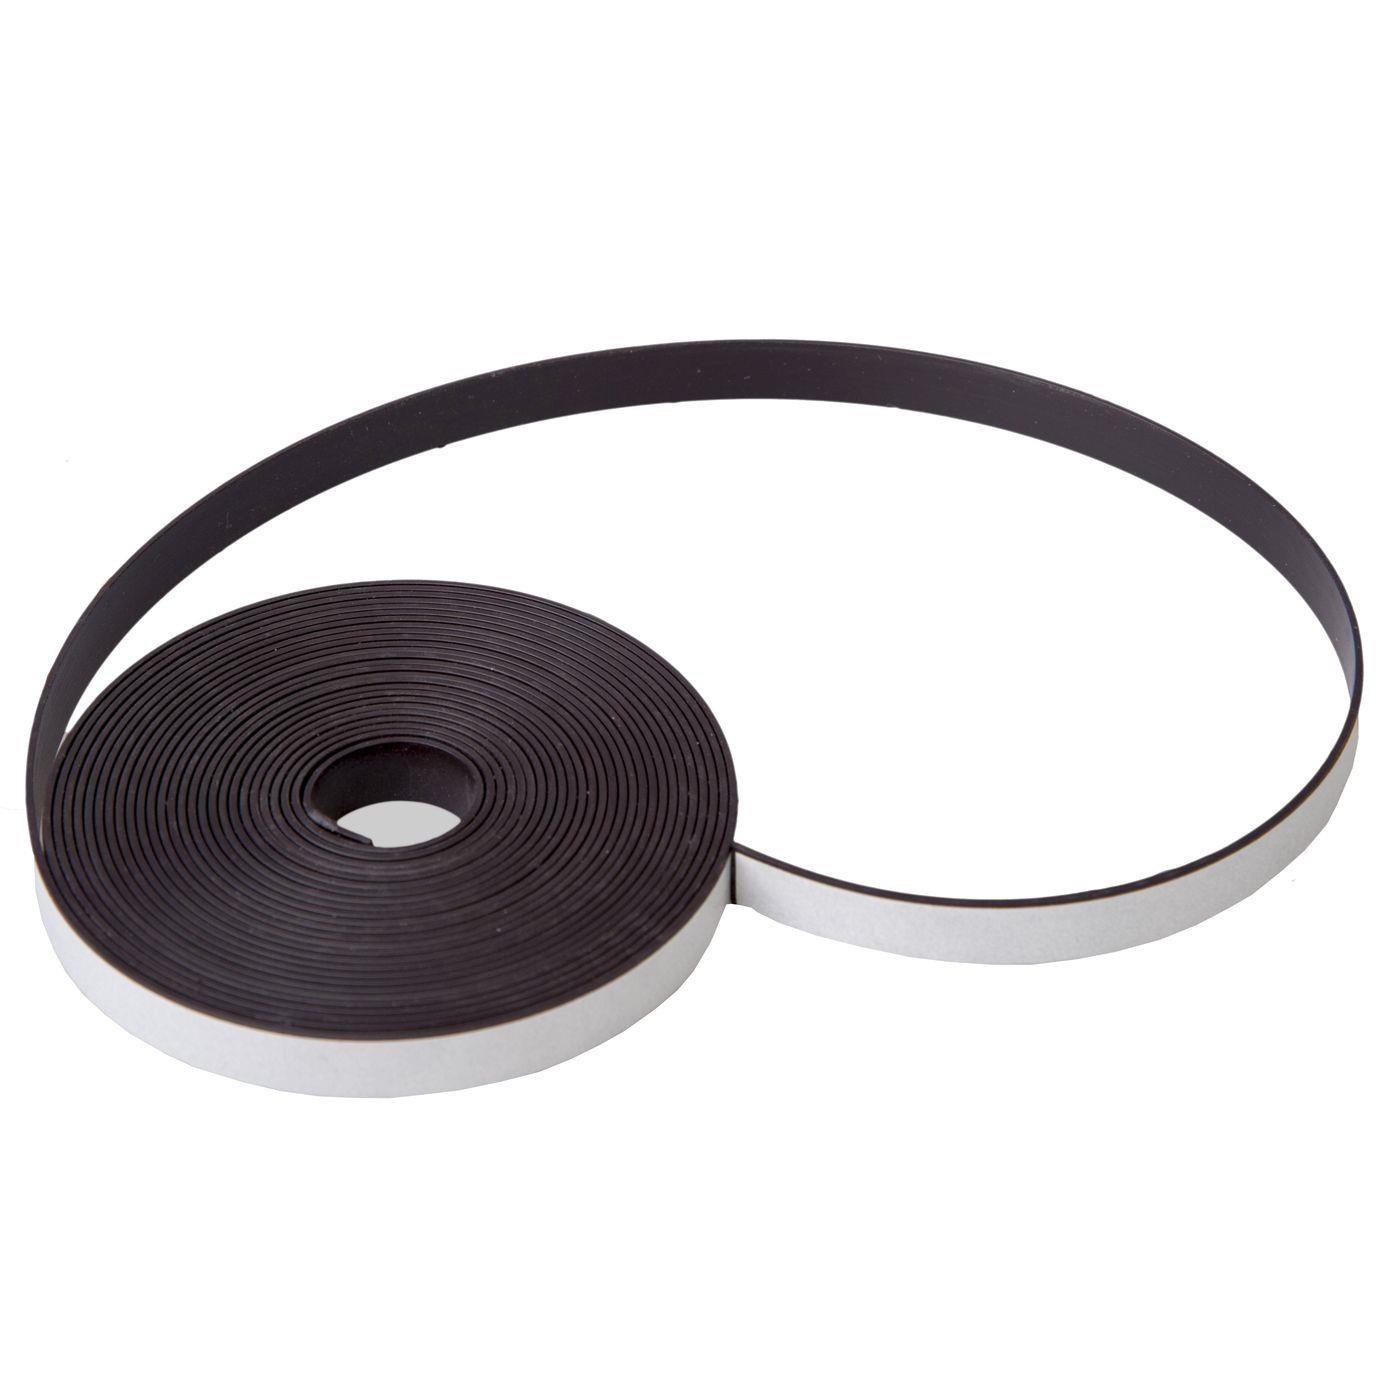 5m Anisotropic magnetic tape Black 1x10mm Magnetic tape for LED drywall profiles